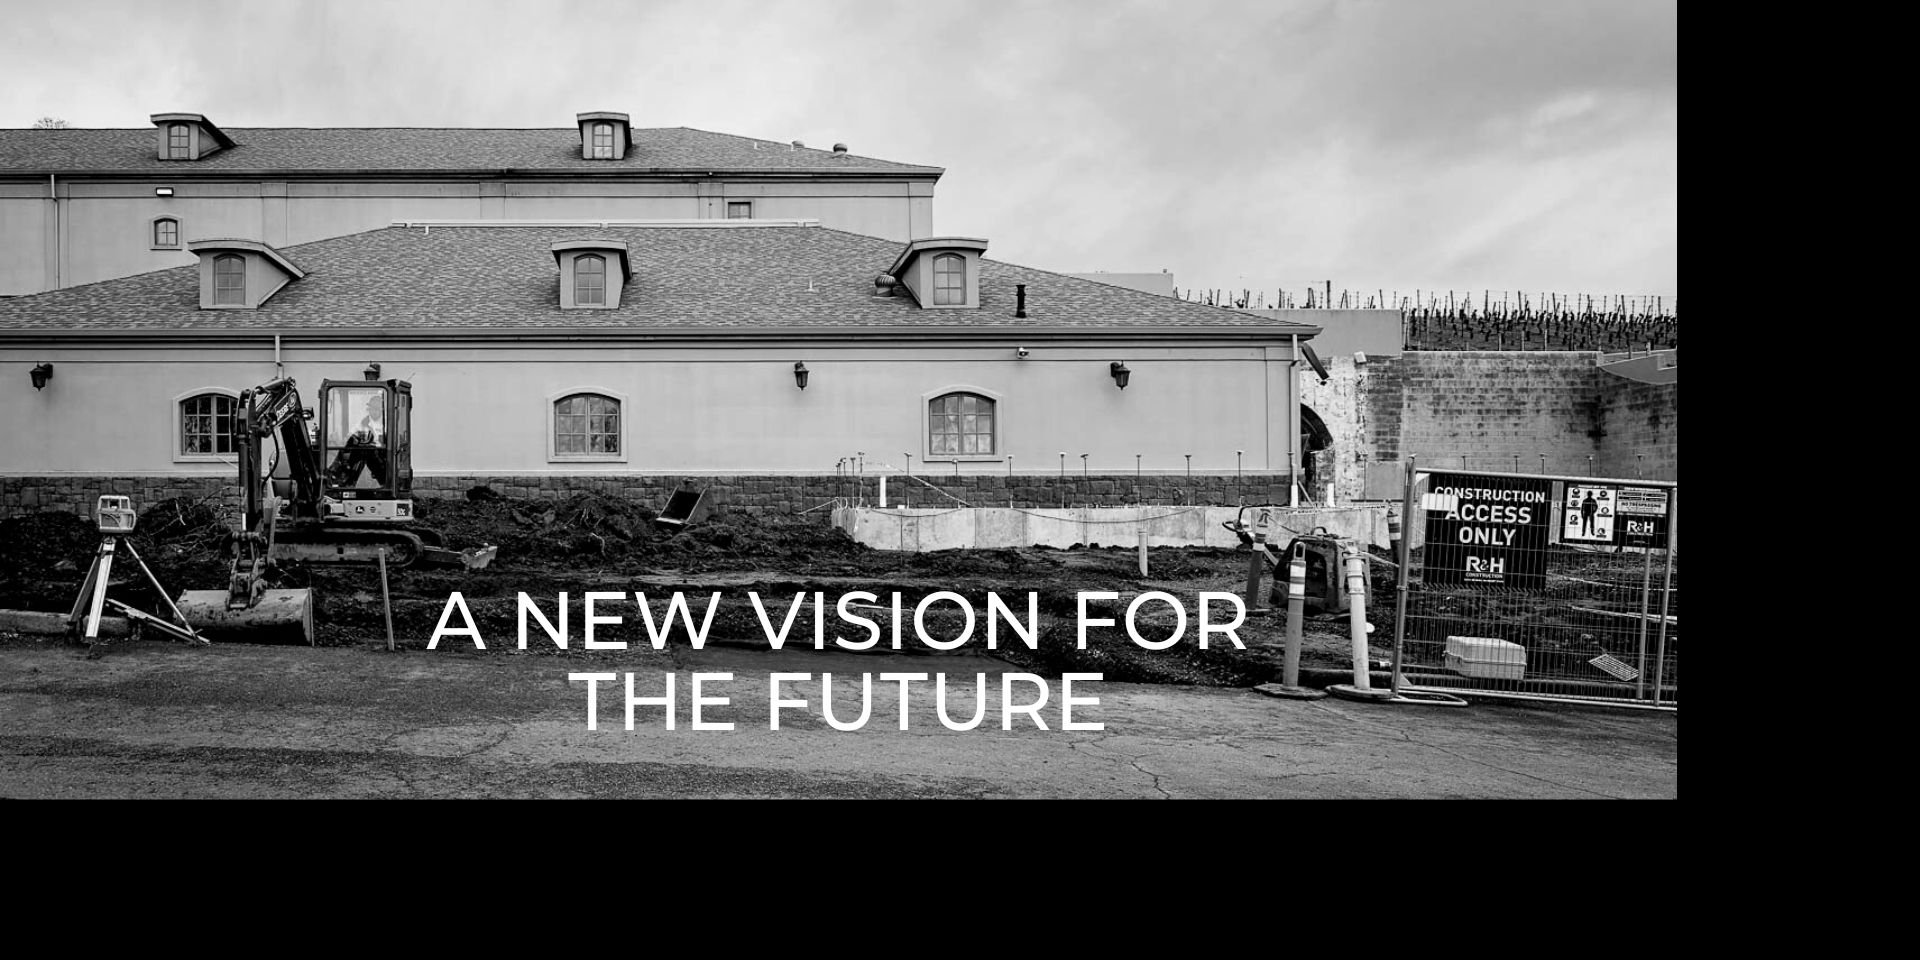 Tasting Room expansion - A New Vision For The Future